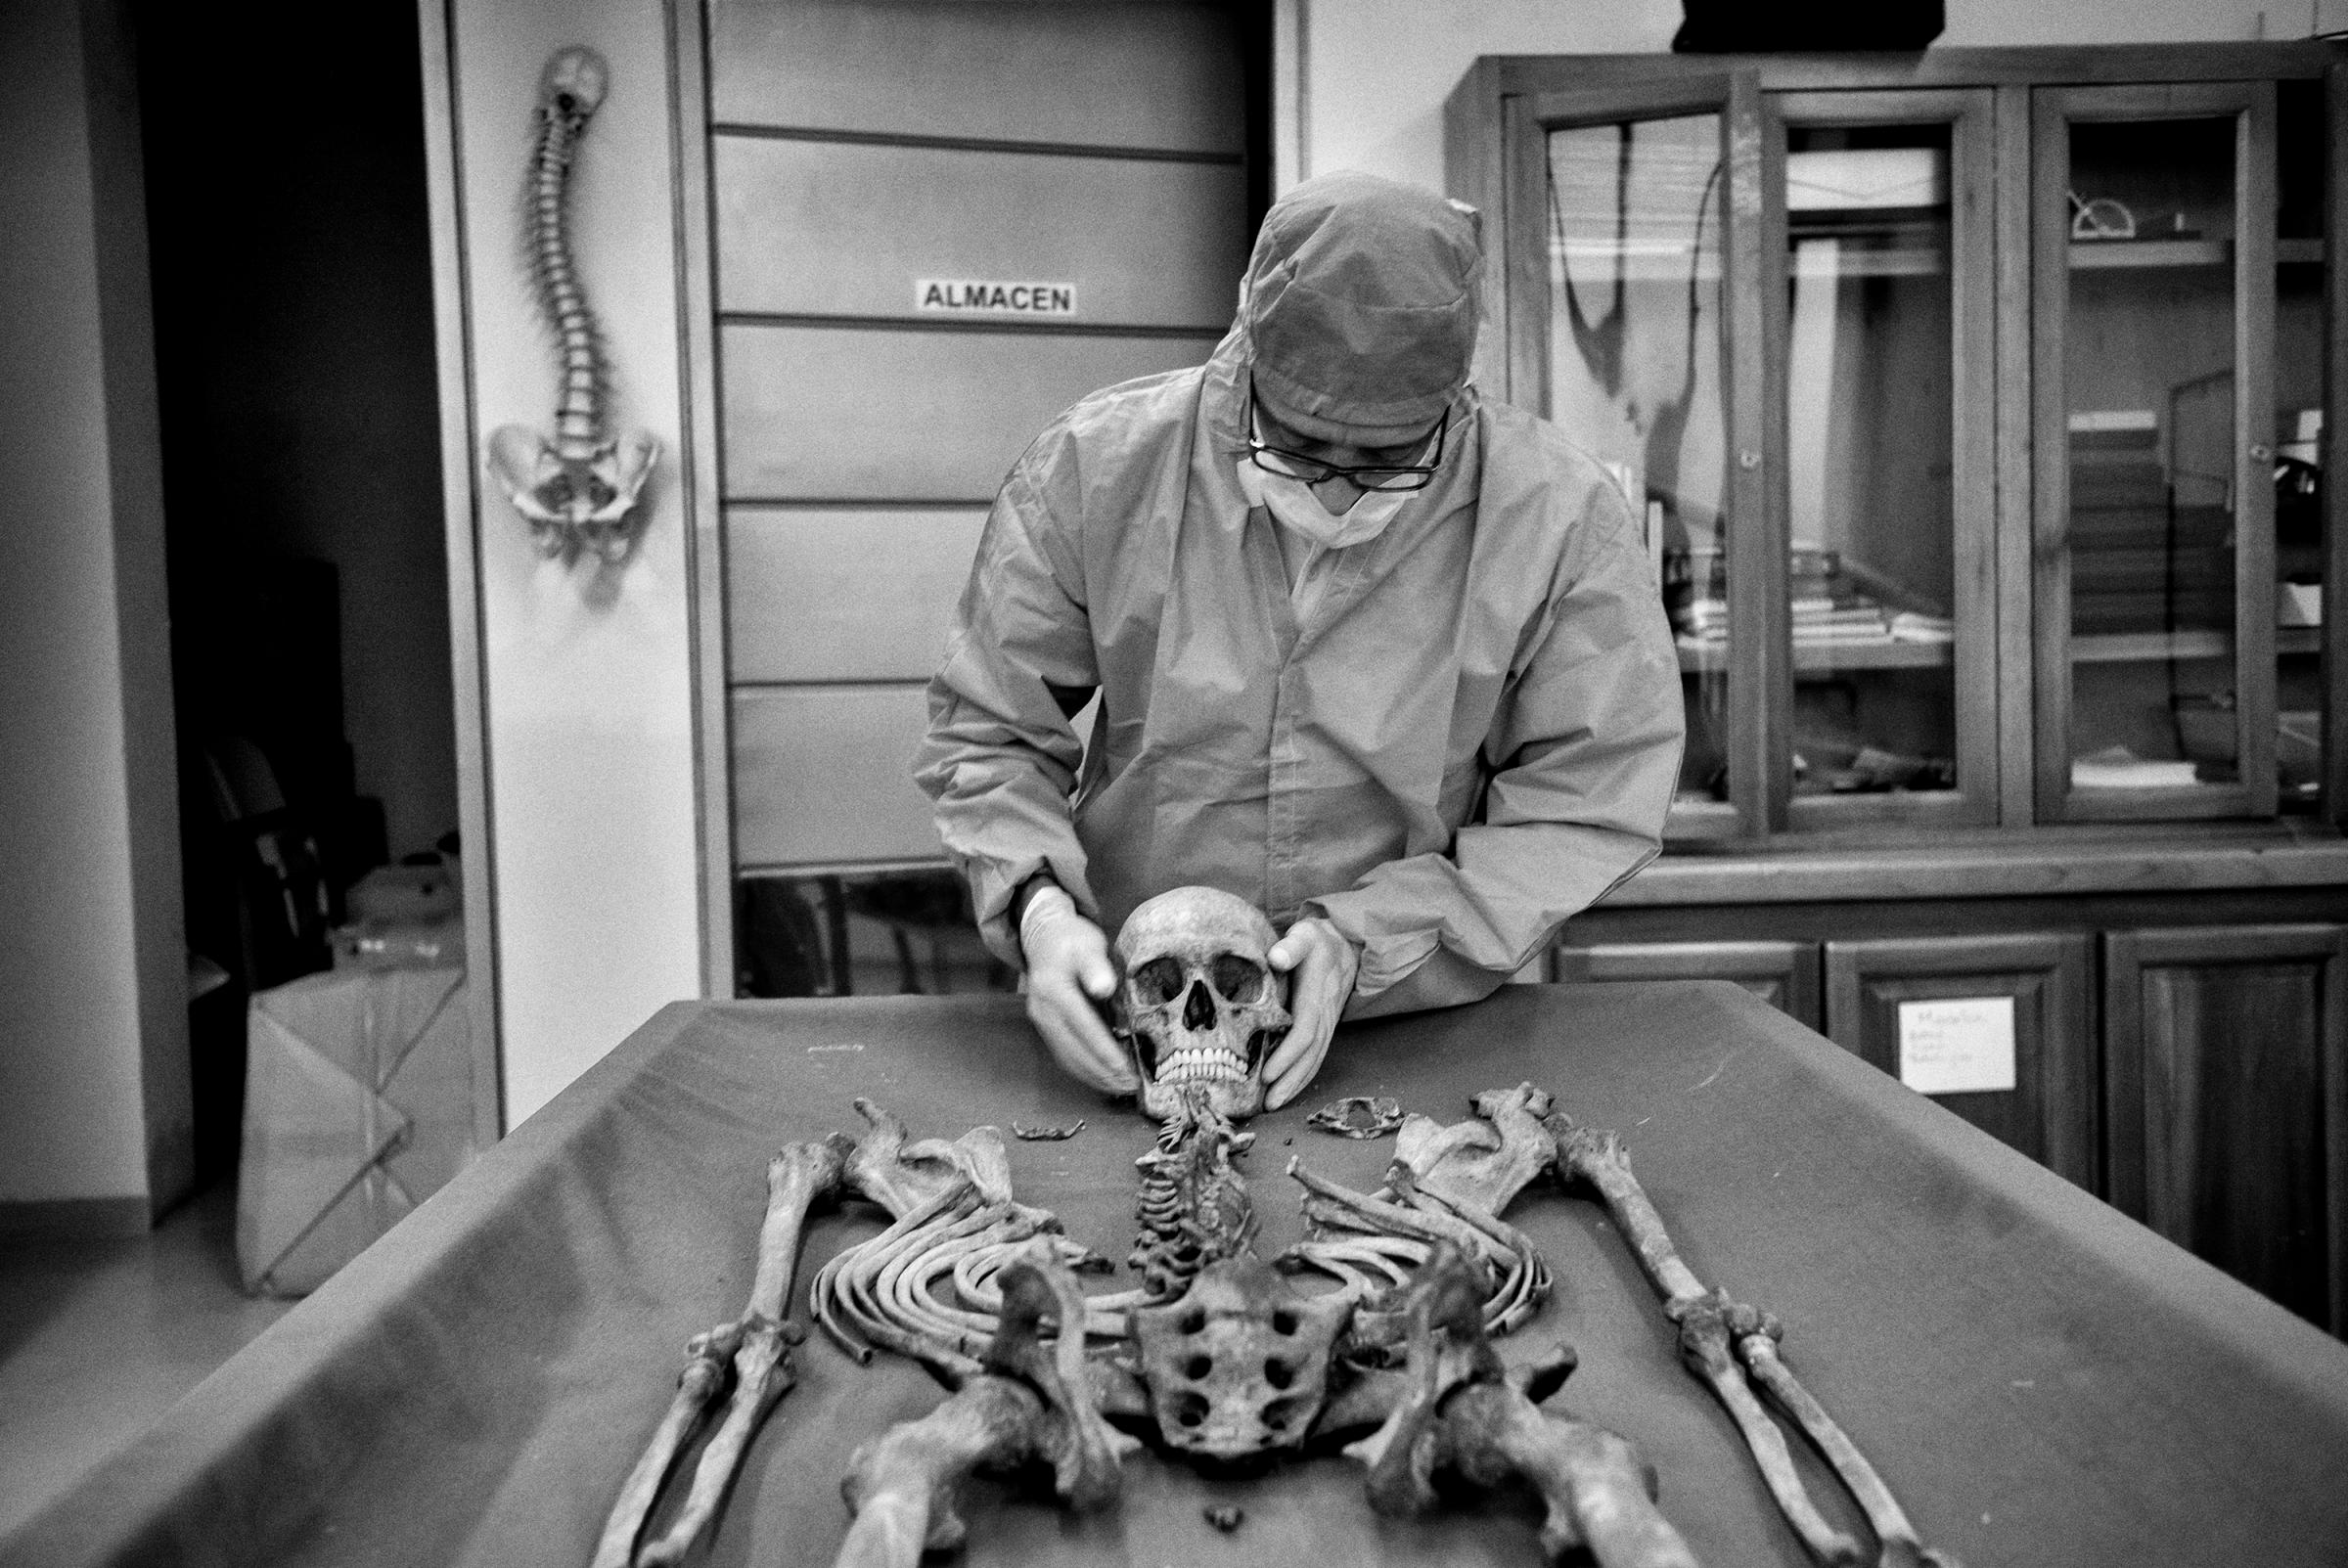 A Forensic investigator with the Colombian Prosecutor's office examines an unidentified corpse (NN). The Human identification group from Antioquia, Colombia is comprised of four anthropologists, three dentists, two doctors, one assistant and a photographer. Since it was established, they have done 1325 exhumations of unidentified corpses, of which 653 have been identified and returned to their families. There are more than 96,000 people missing in Colombia, Antioquia, Medellin,March 2015.